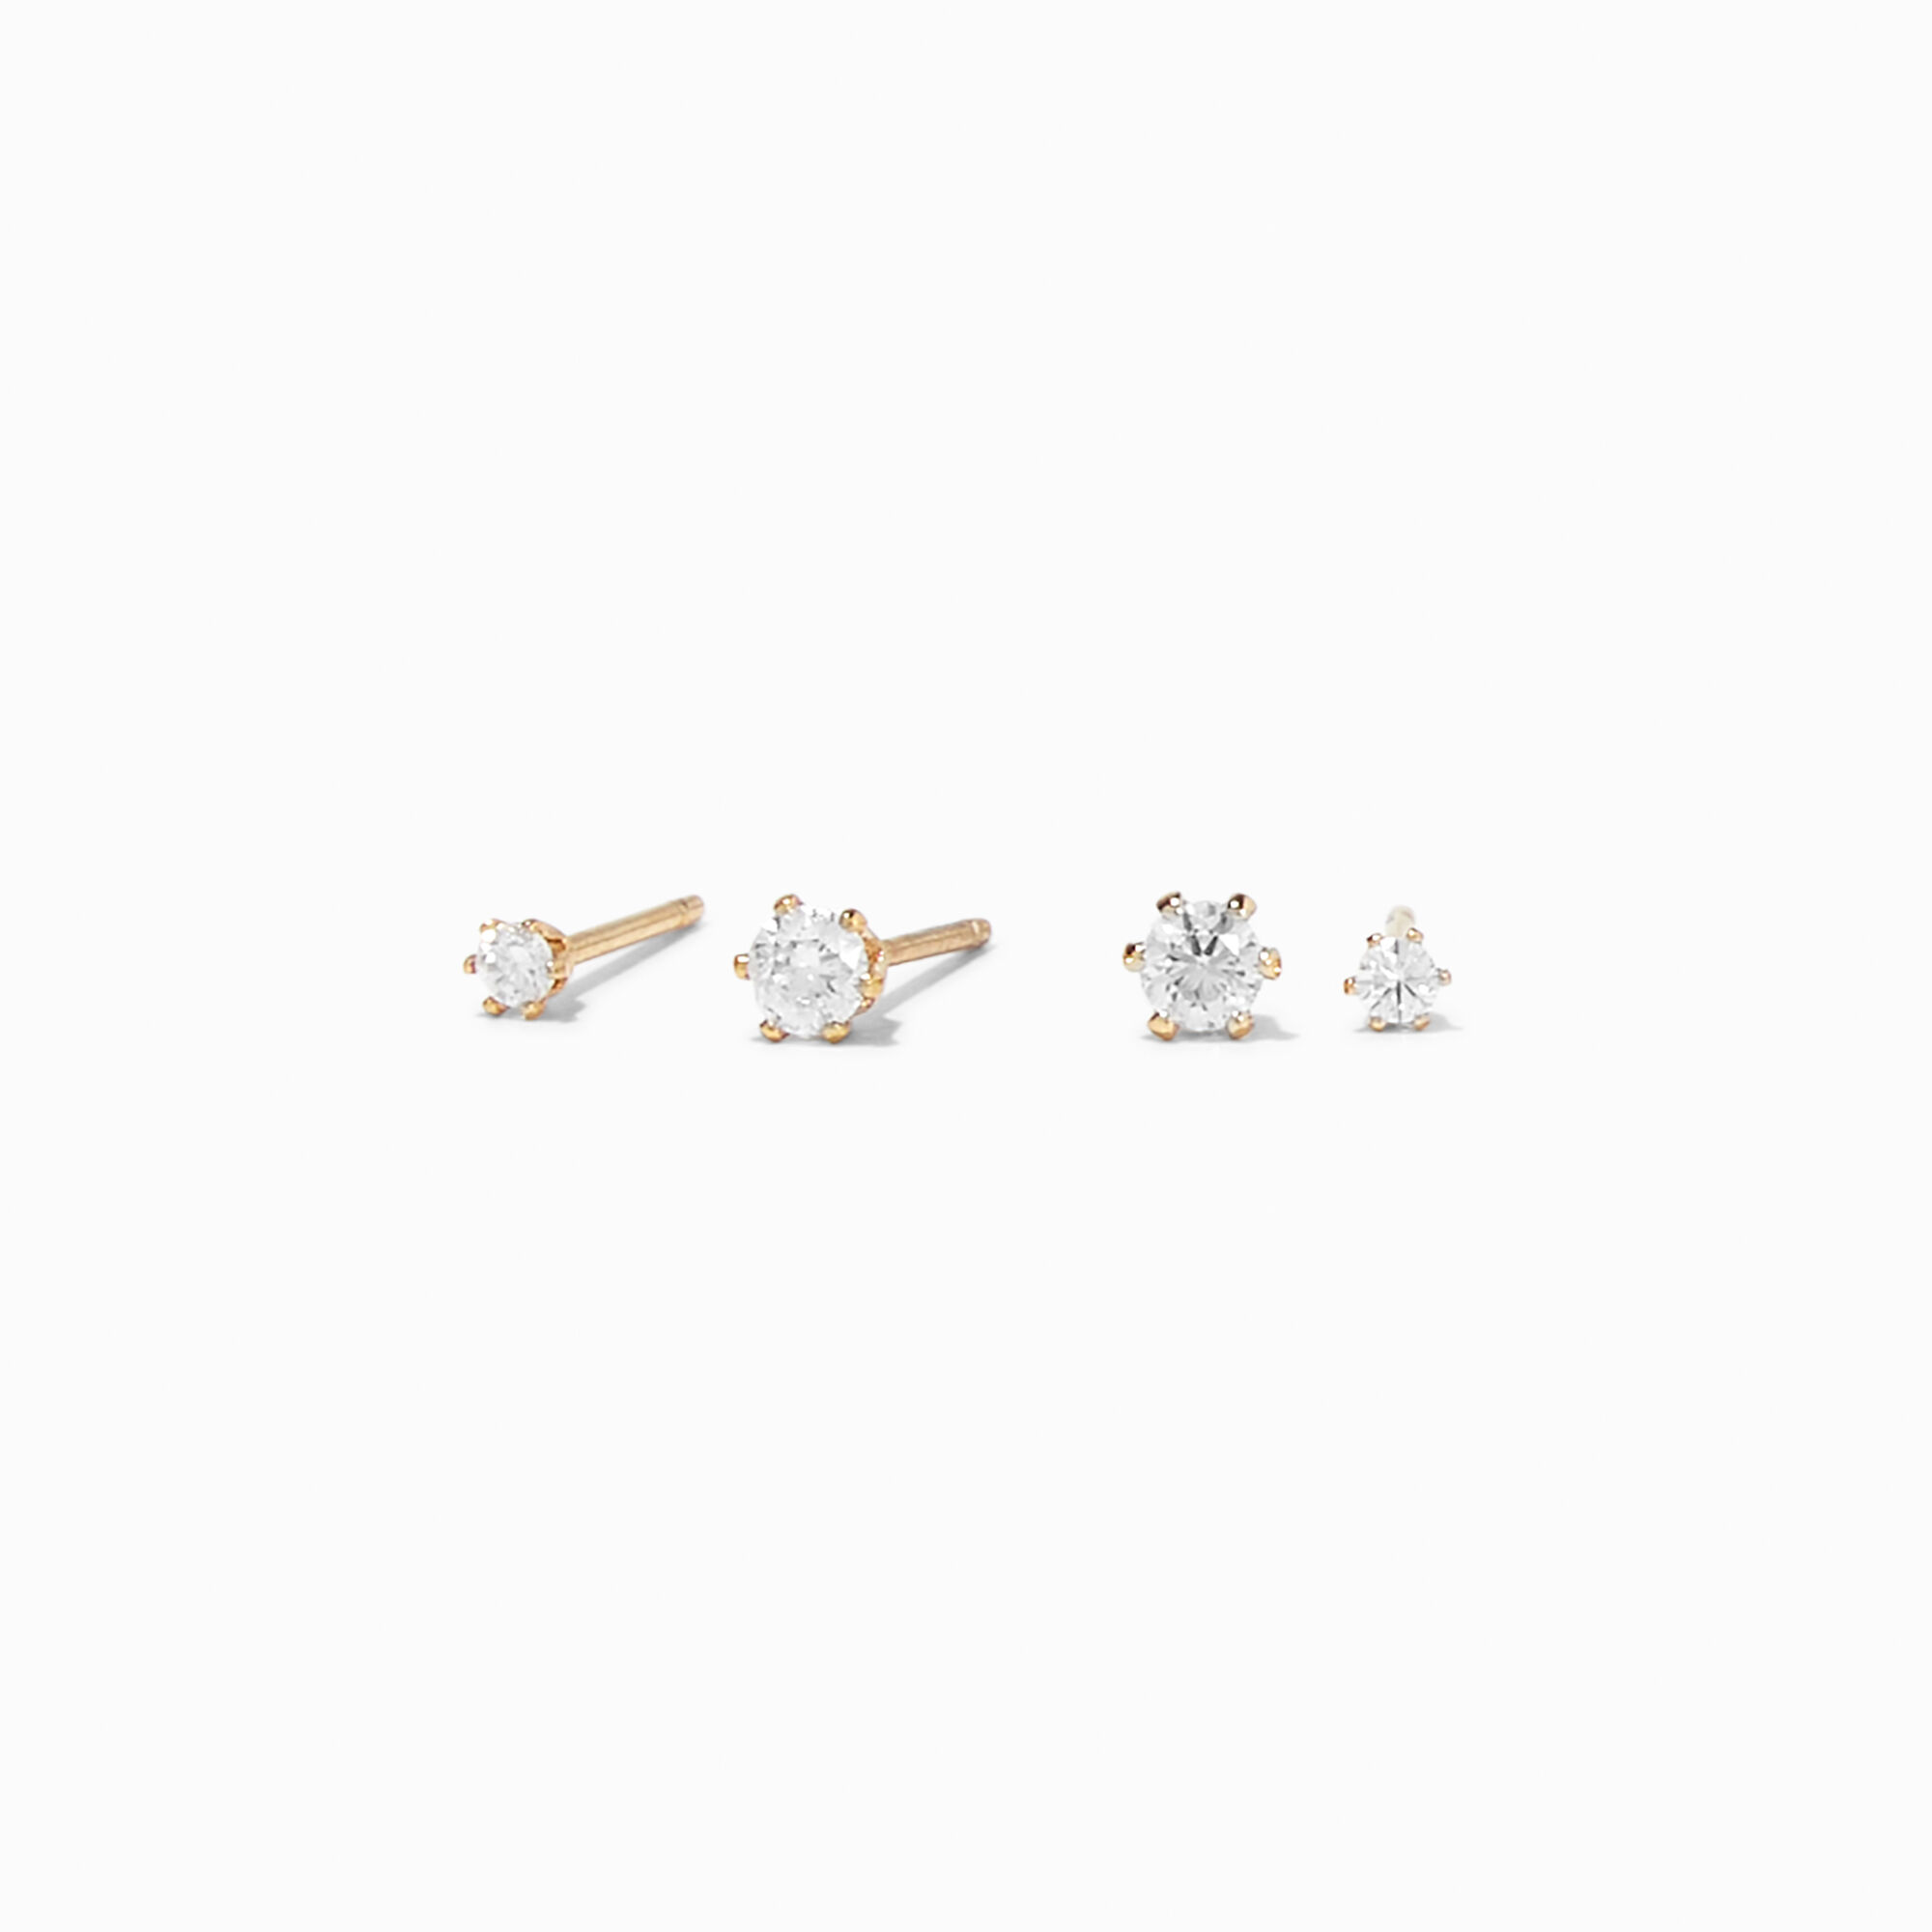 View Claires 18K Plated Cubic Zirconia Stud Earring Set 2 Pack Gold information